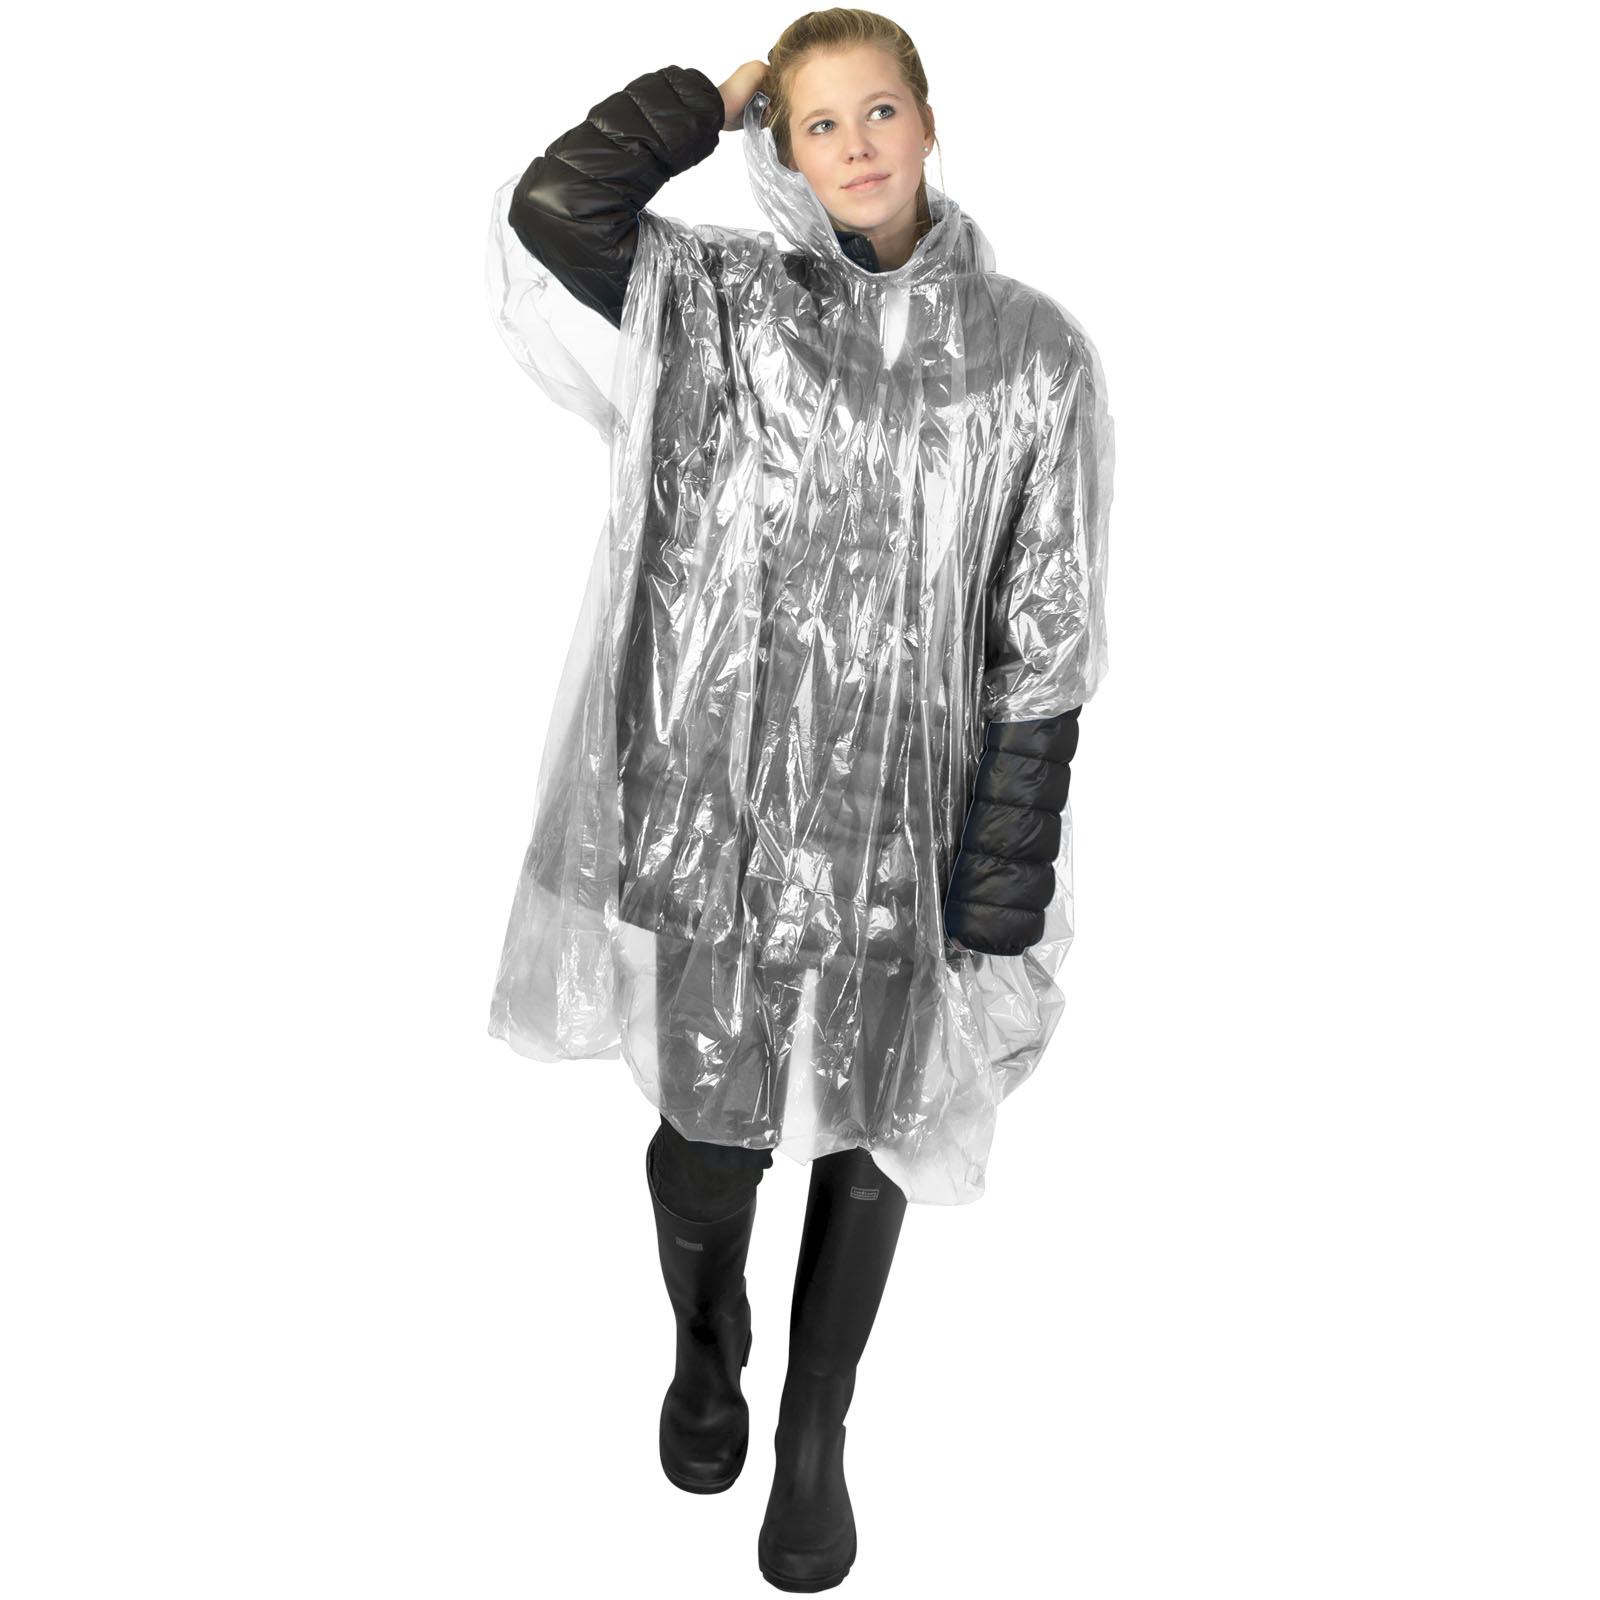 Advertising Rain Ponchos - Mayan recycled plastic disposable rain poncho with storage pouch - 3